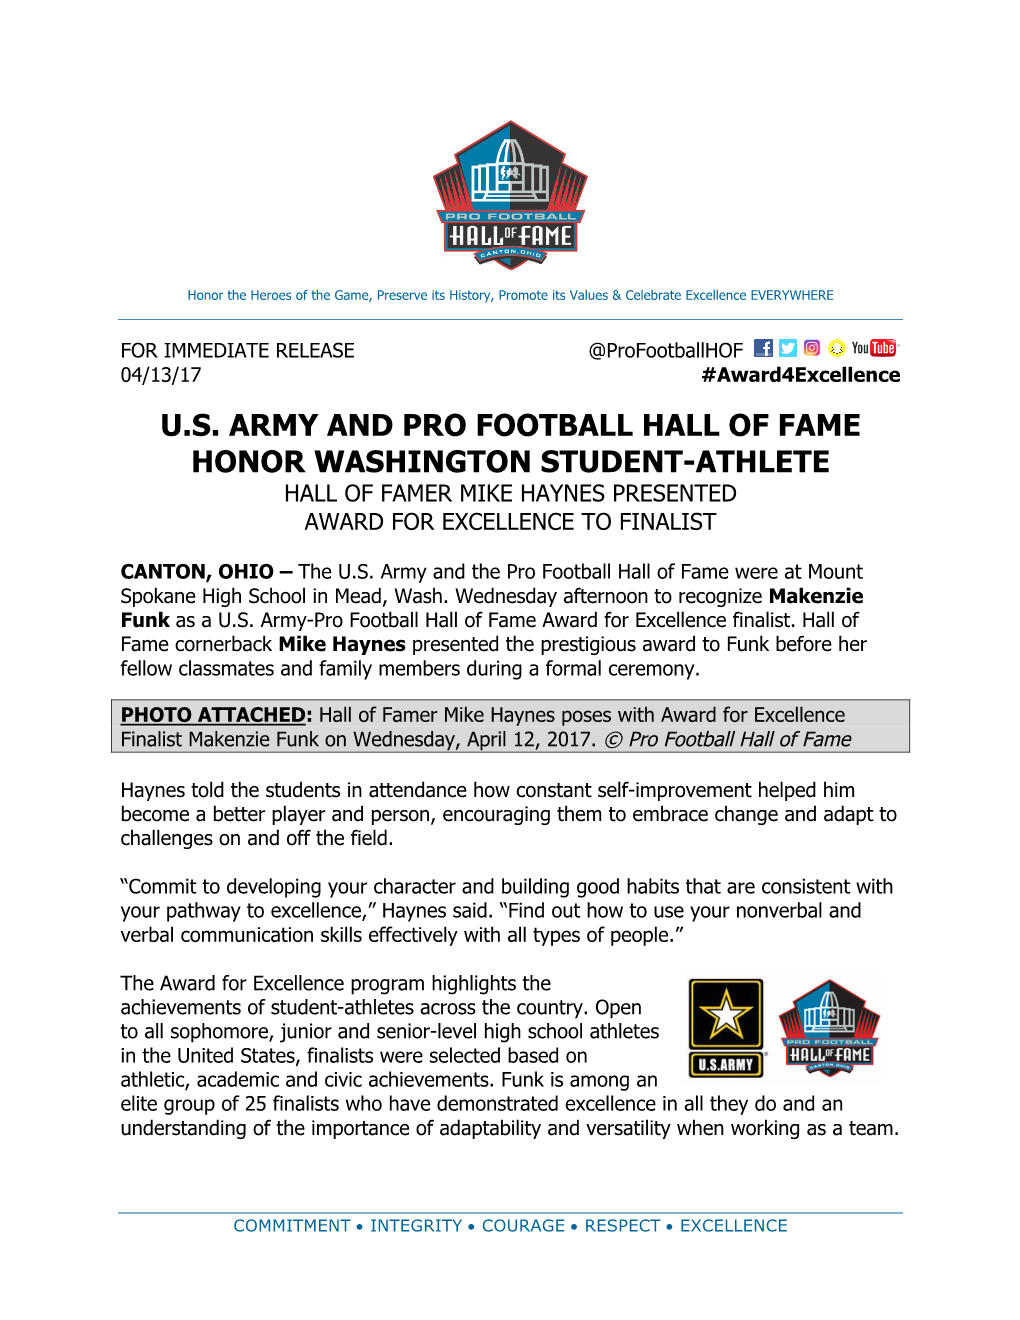 U.S. Army and Pro Football Hall of Fame Honor Washington Student-Athlete Hall of Famer Mike Haynes Presented Award for Excellence to Finalist